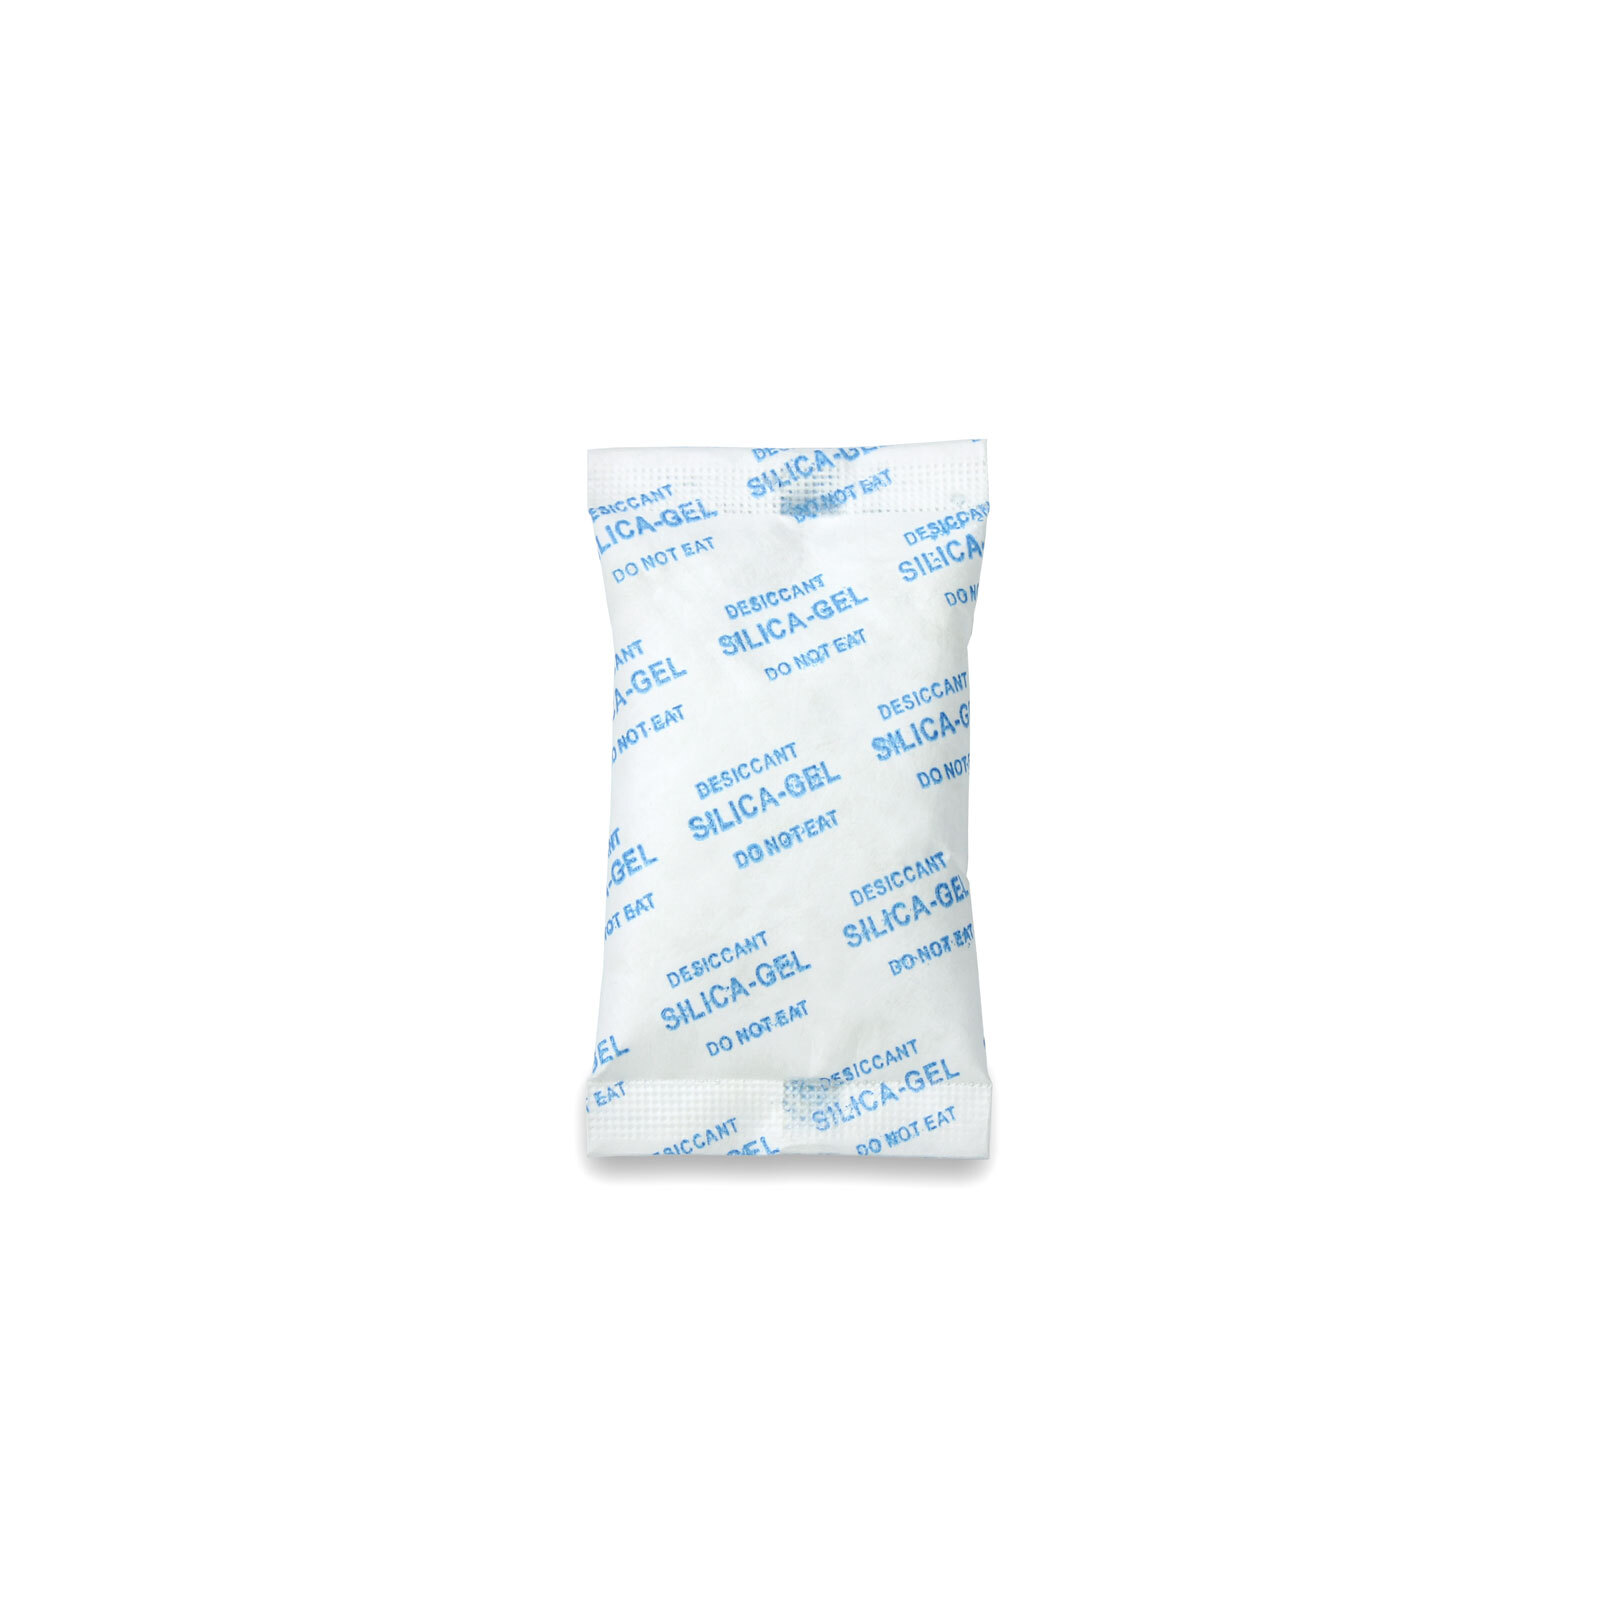 Silica Gel Packets: 7 Surprising Uses of Silica Gel Packets